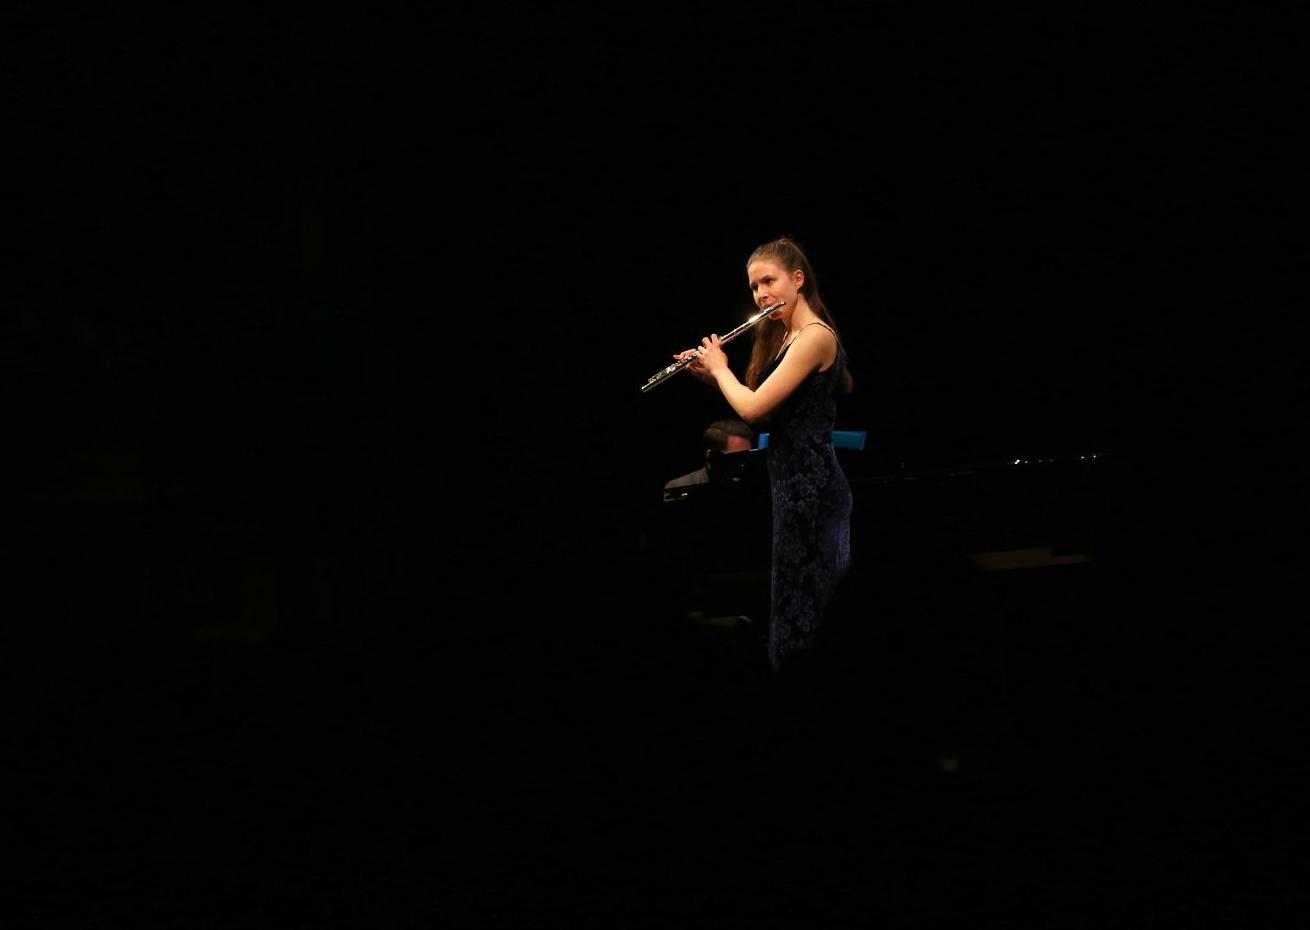 Flautist Daisy Noton, a member of the National Youth Orchestra. Photograph: Sam Stephenson/ Homelink